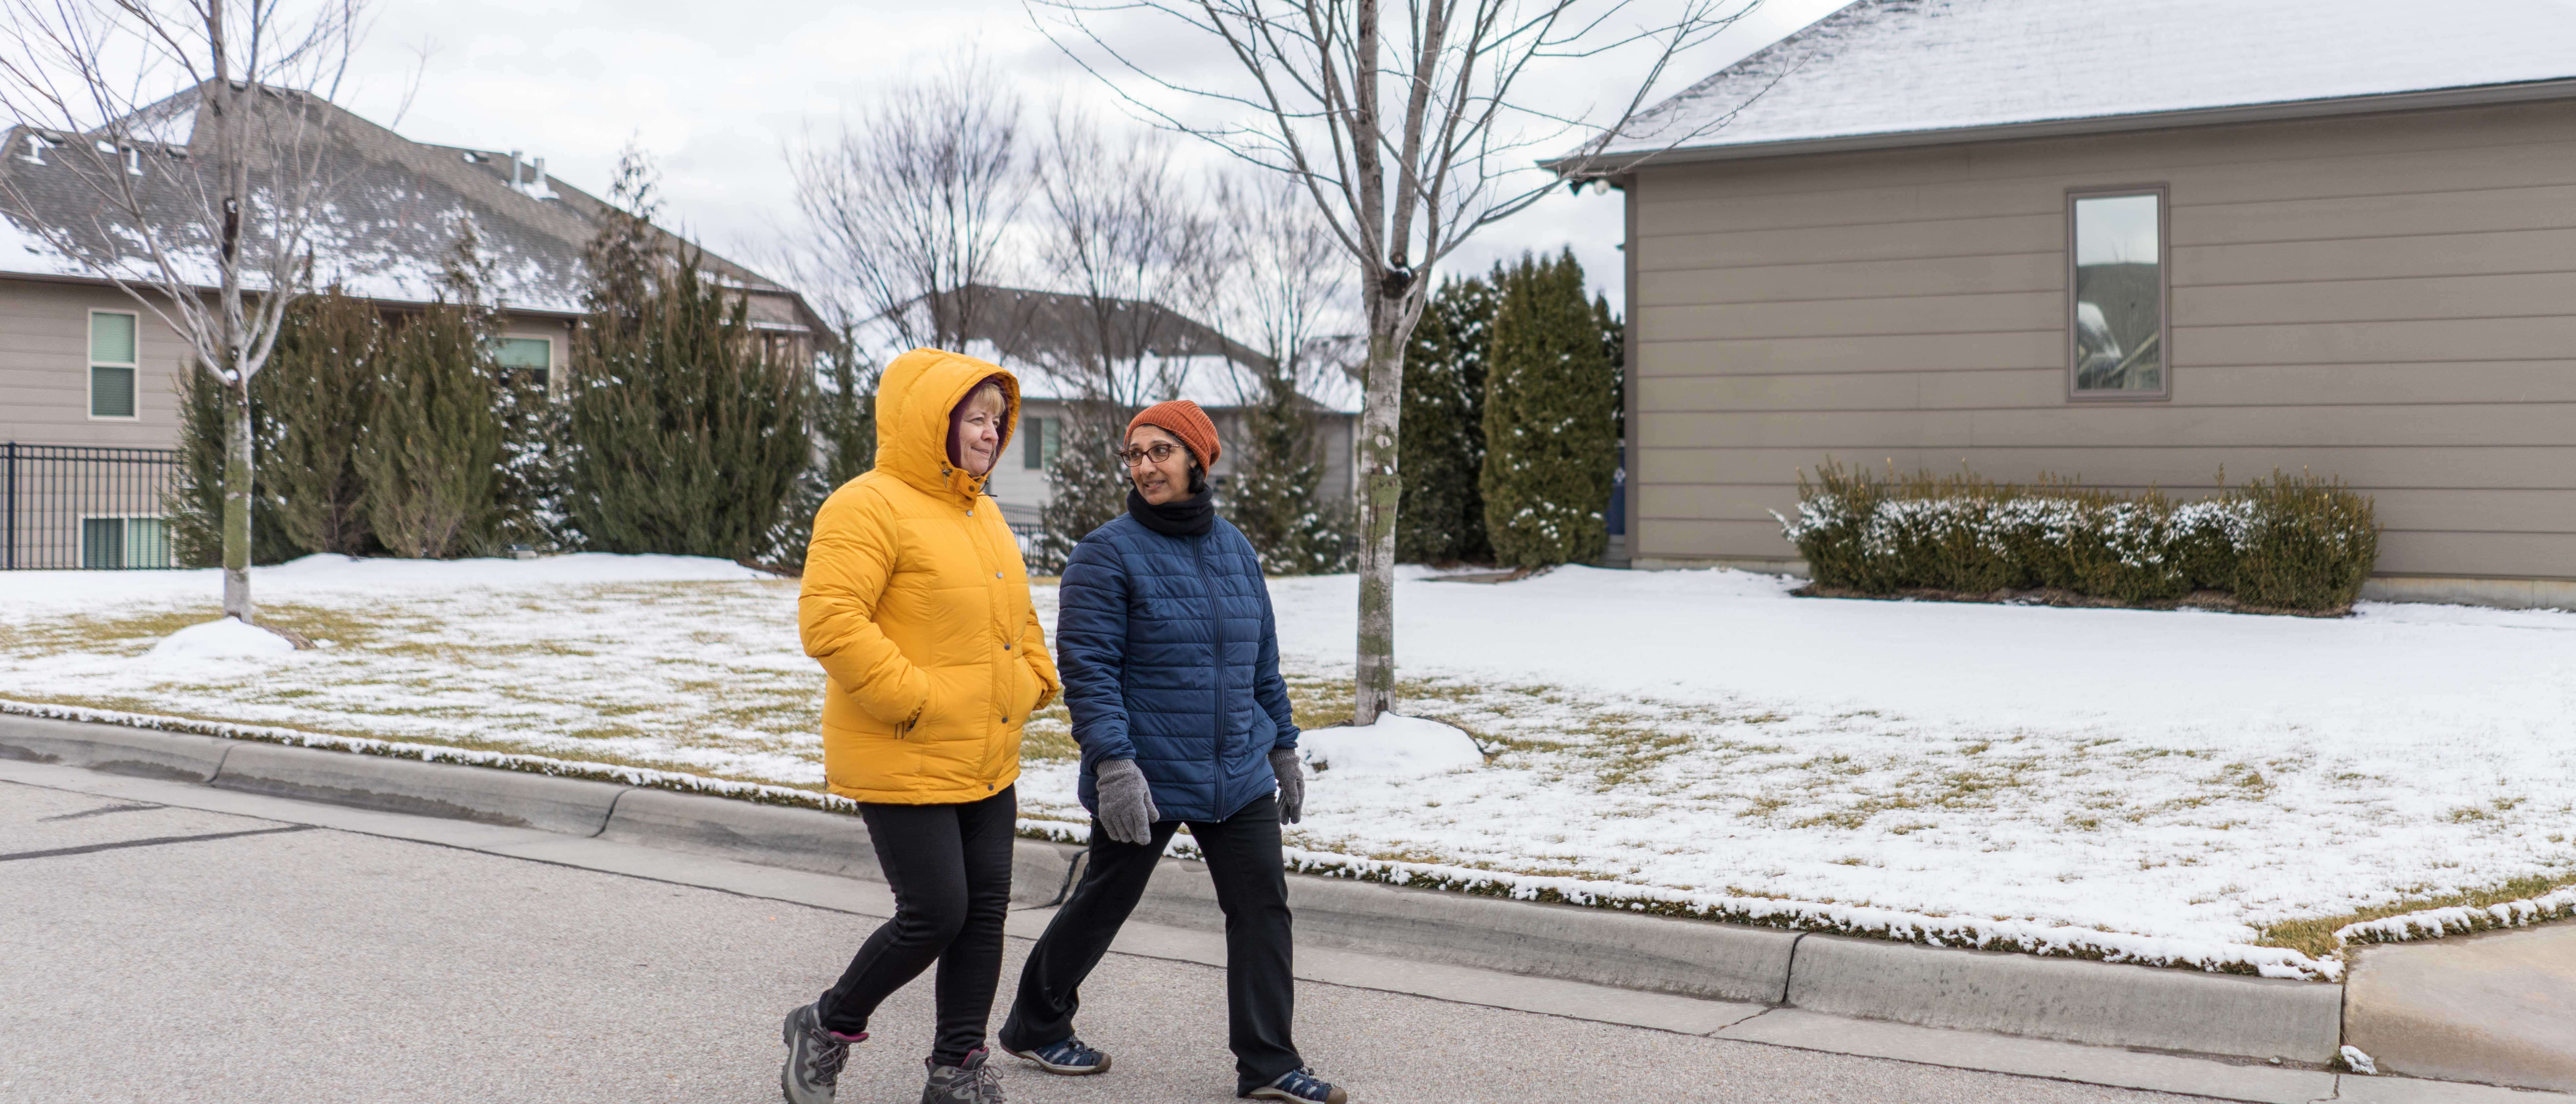 Two women walk together through a residential neighborhood in winter.